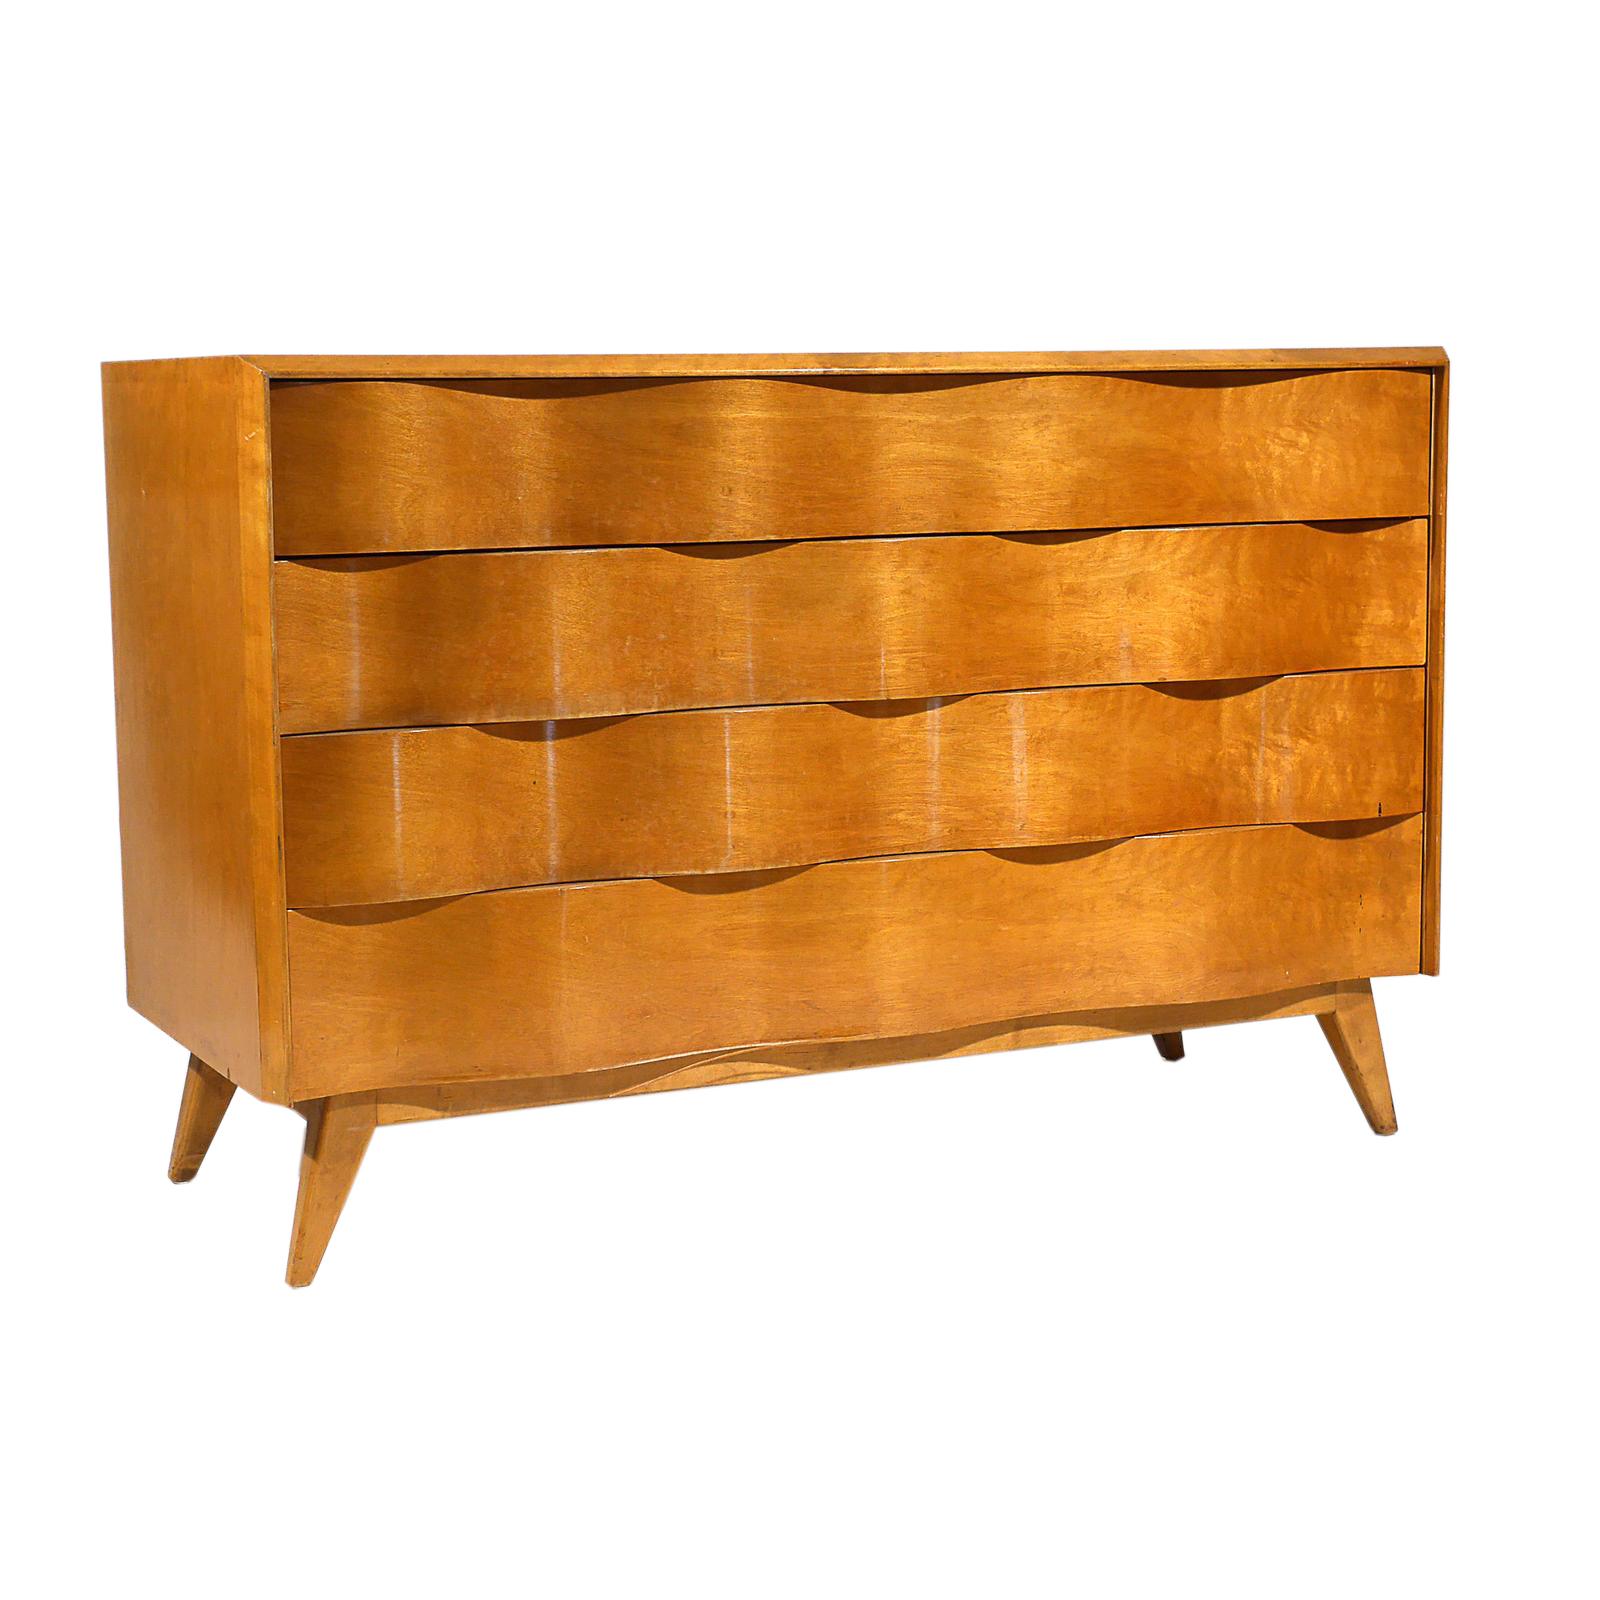 A vintage Mid-Century Modern Swedish commode with four large drawers, made of hand carved Burlwood and Birchwood, designed by Edmond J. Spence and produced in Sweden, in good condition. The Scandinavian wave front chest of drawers is supported by